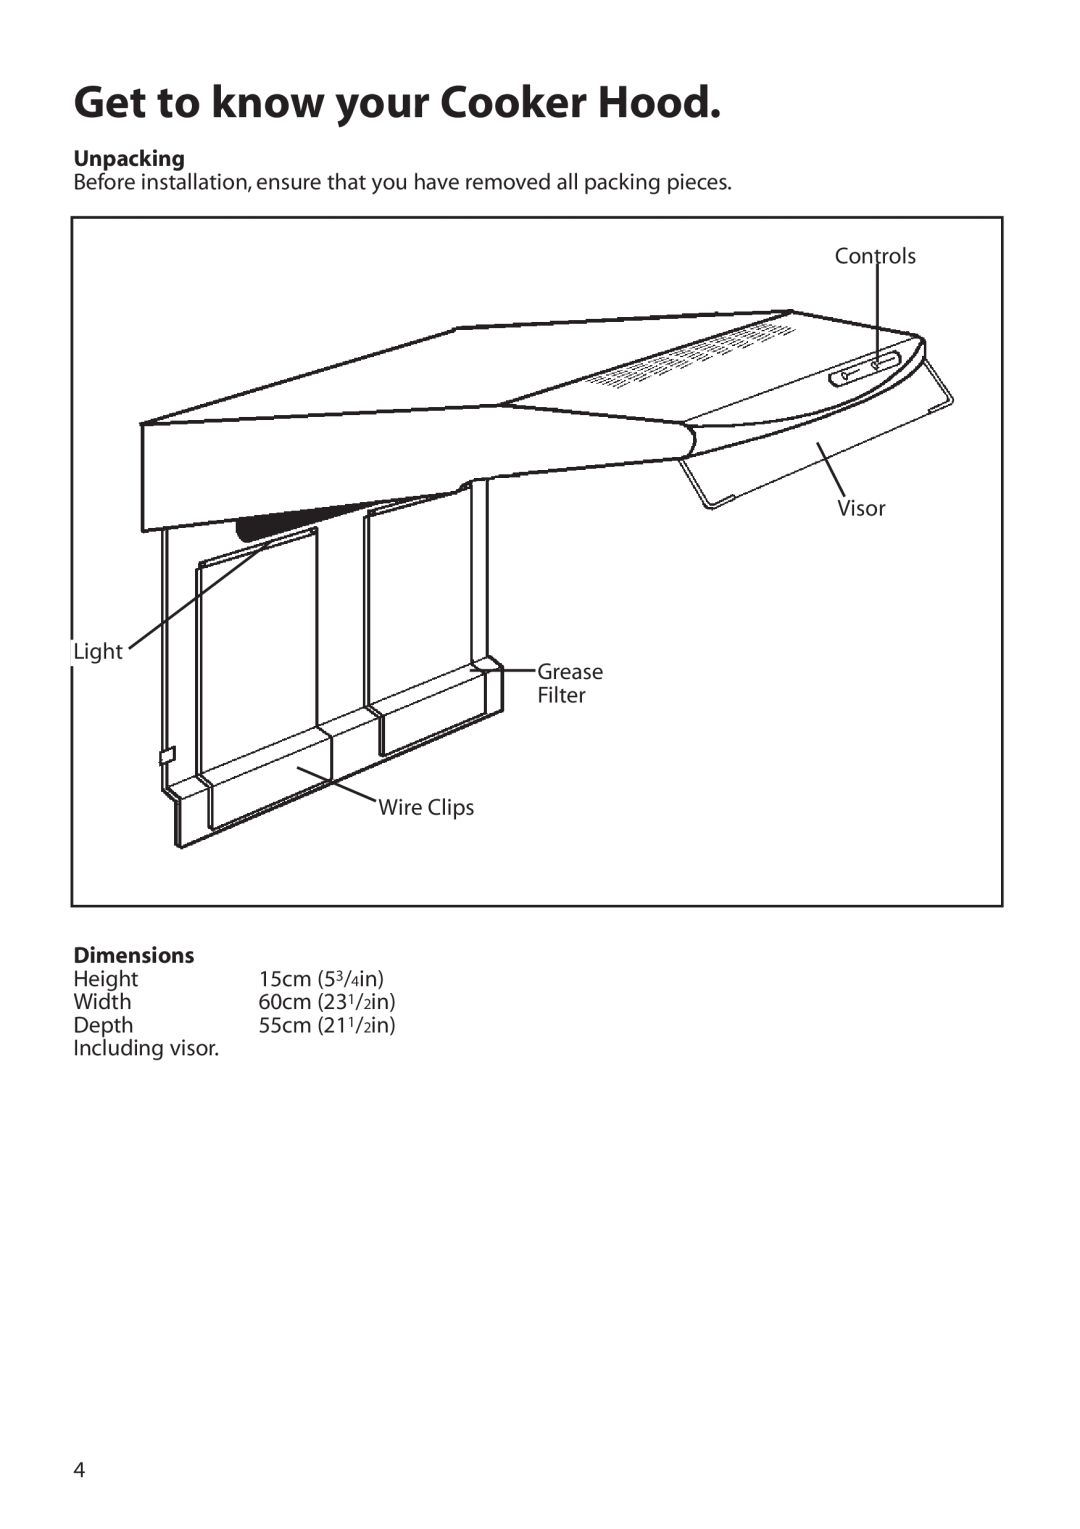 Hotpoint HTV10 manual Get to know your Cooker Hood, Unpacking, Dimensions 